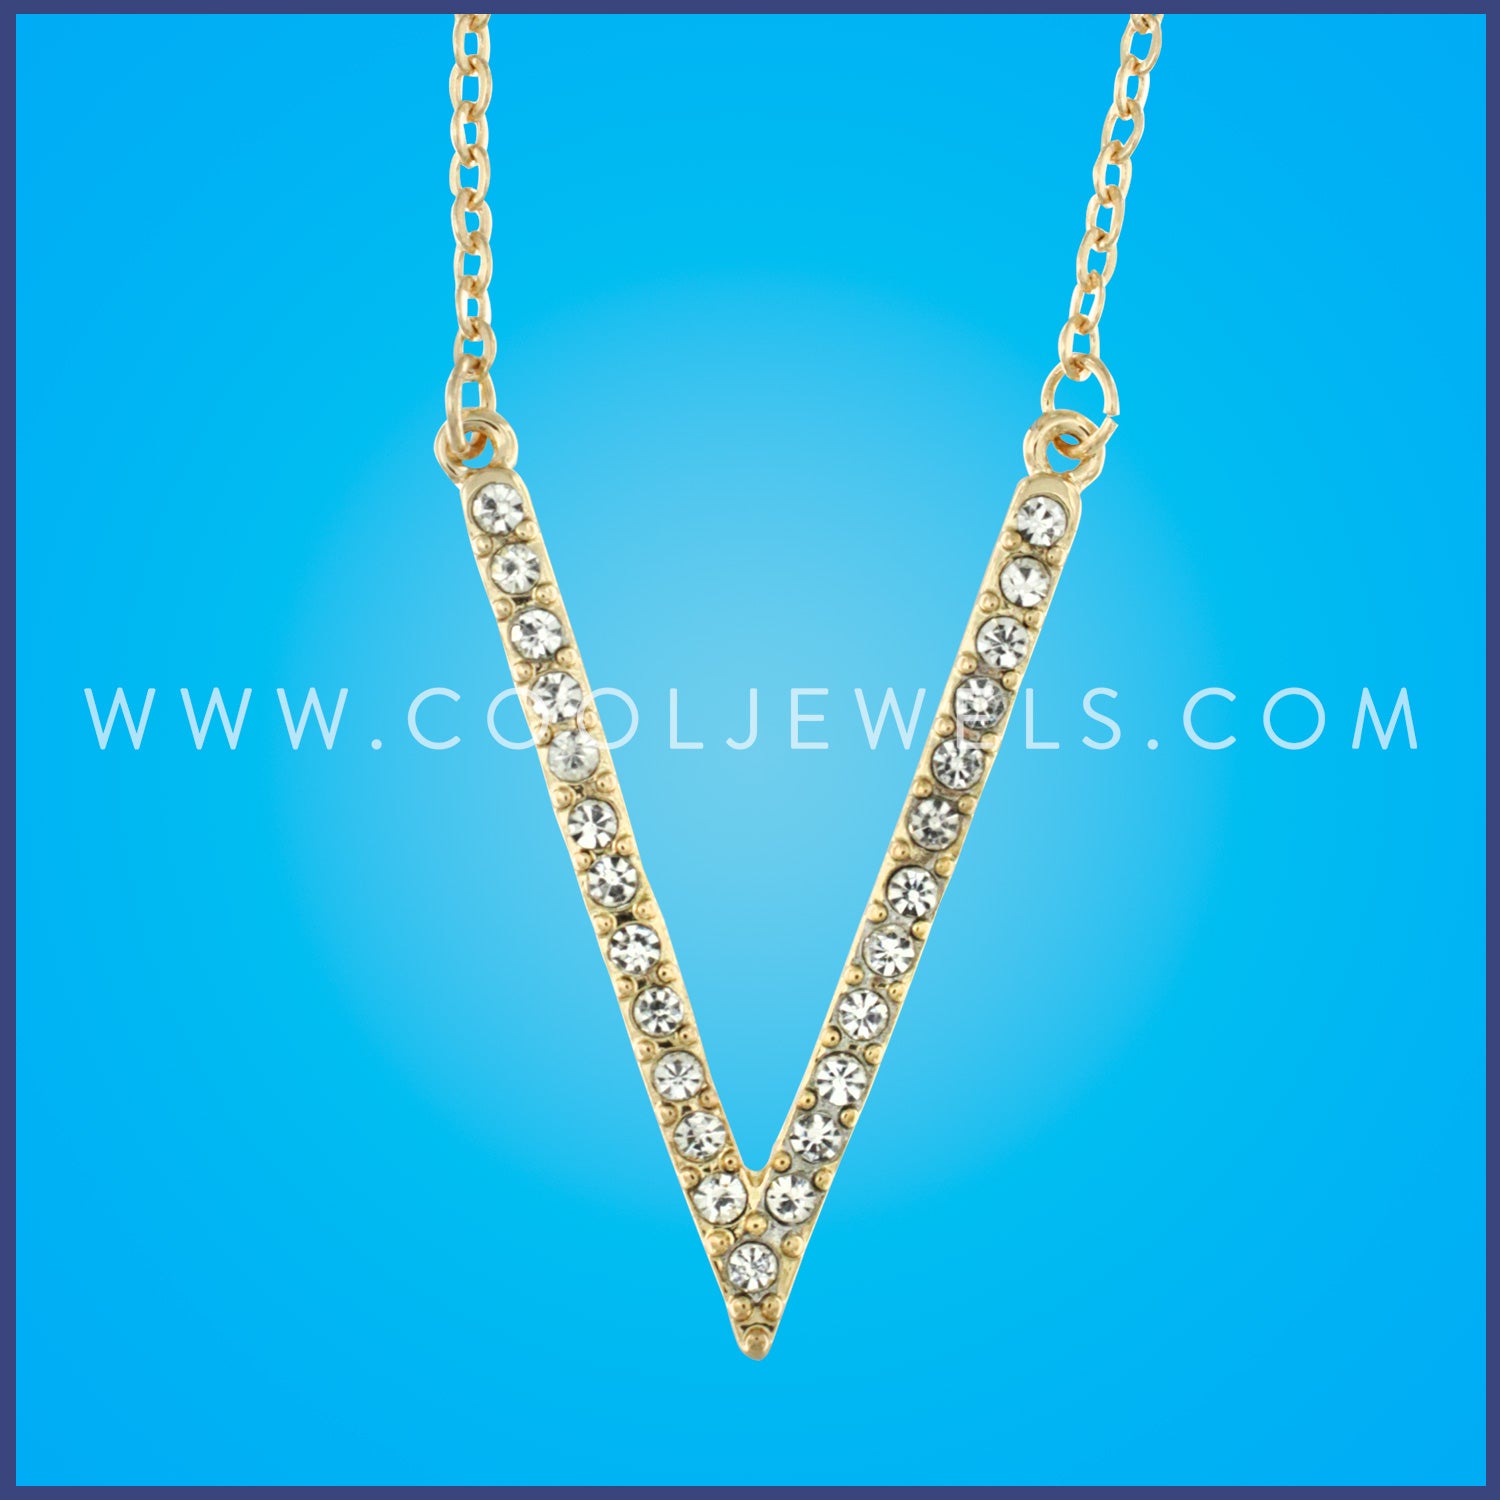 LINK CHAIN NECKLACES WITH V-SHAPE RHINESTONE BAR - ASSORTED COLORS